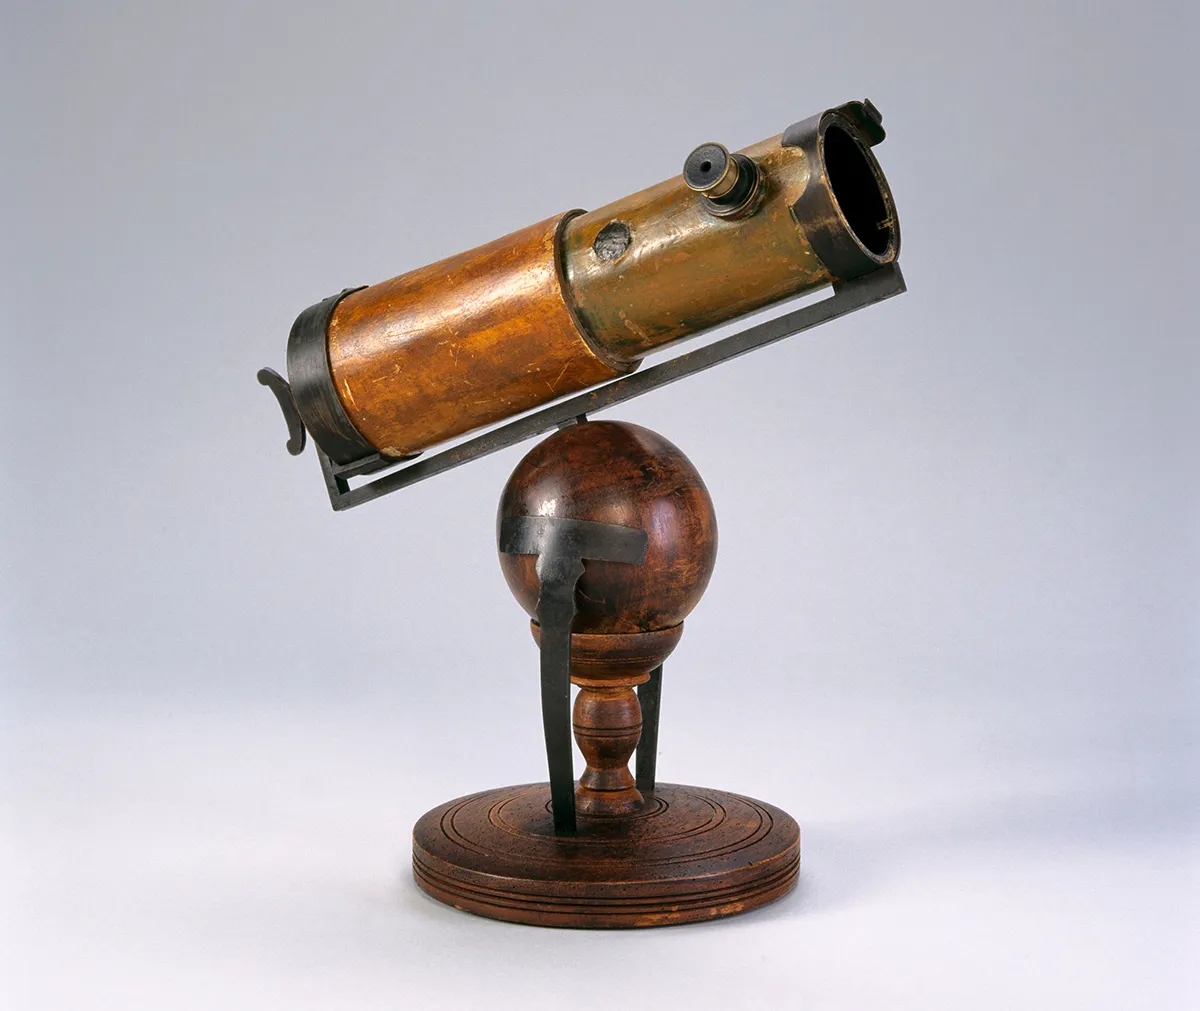 A replica of the first reflecting telescope made by Isaac Newton and shown to the Royal Society in 1668. Credit: SSPL/Getty Images